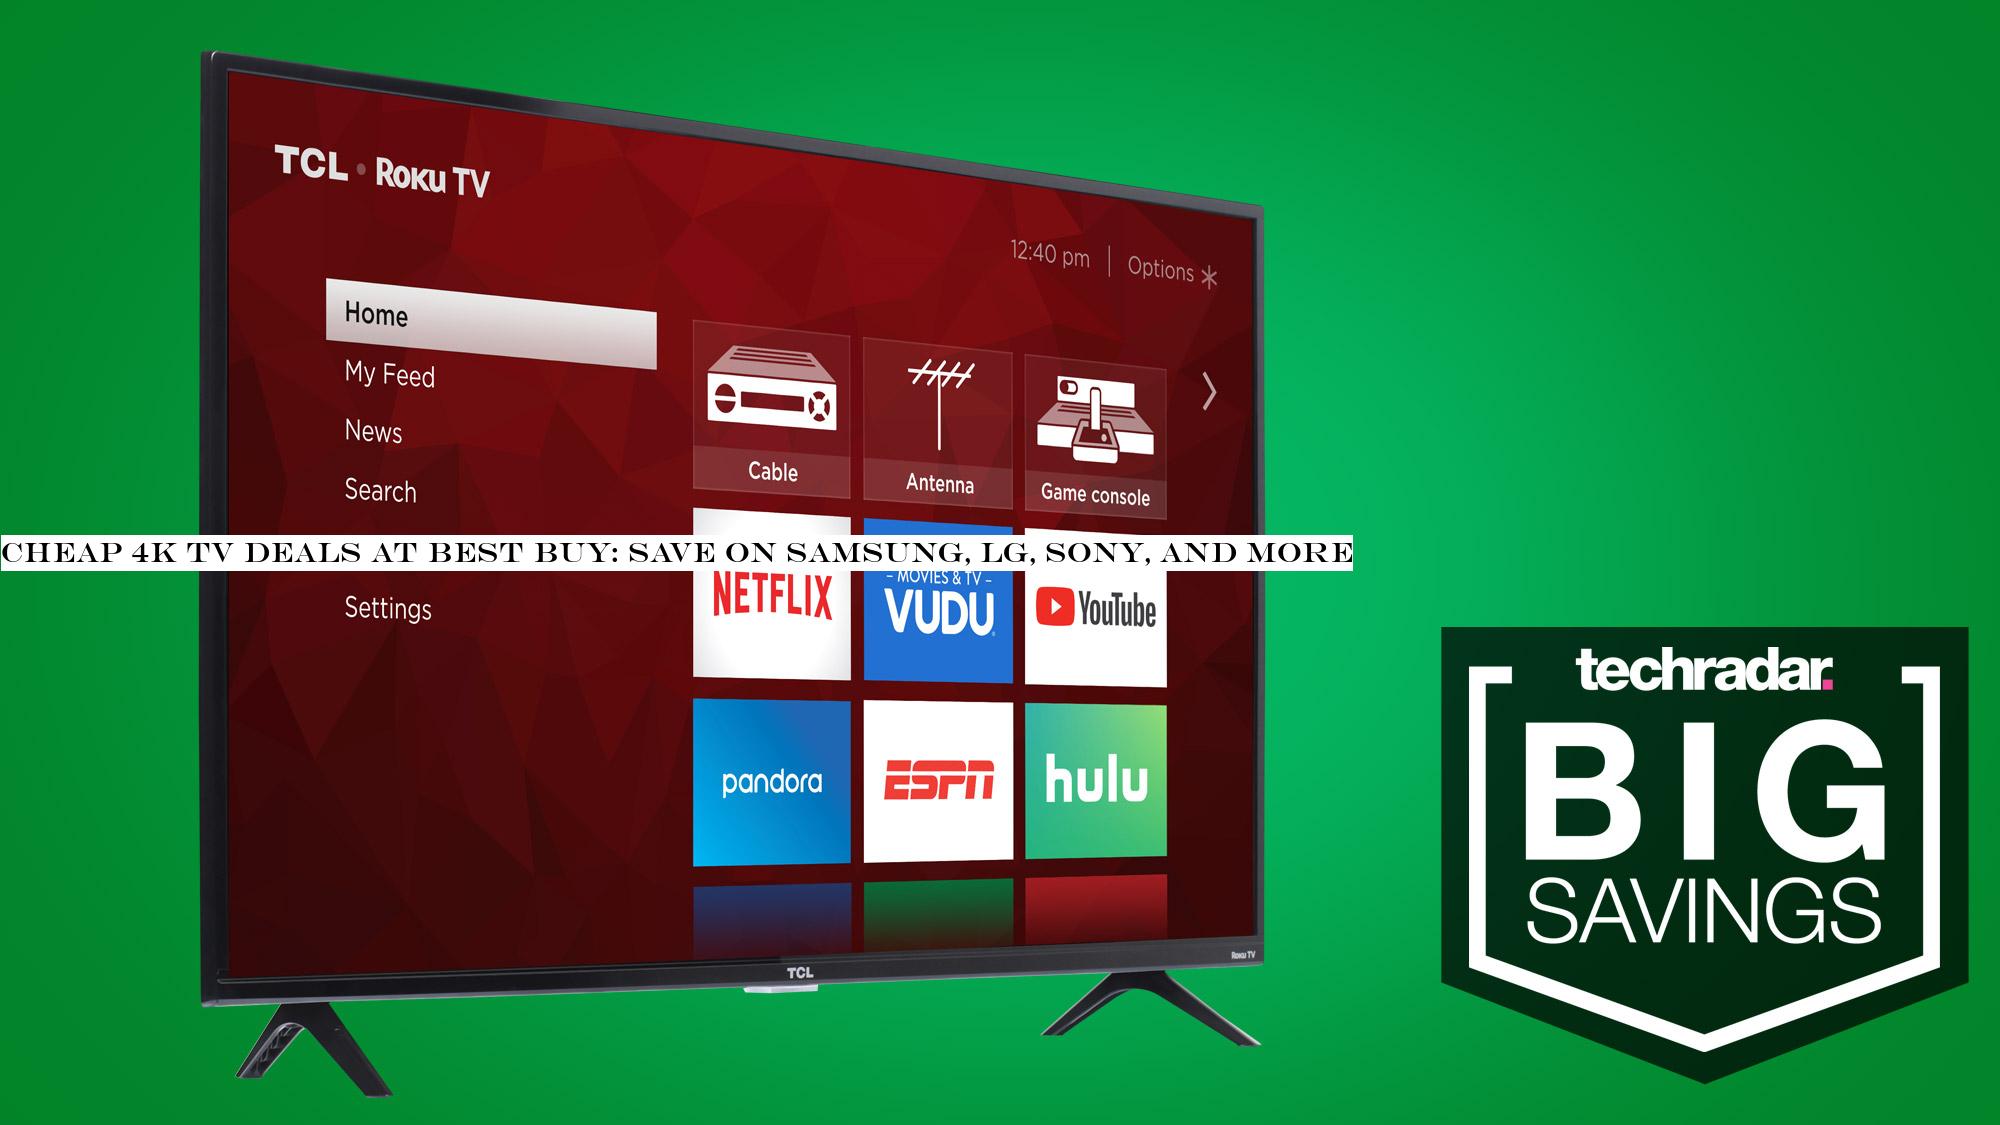 Cheap 4K TV deals at Best Buy: save on Samsung, LG, Sony, and more